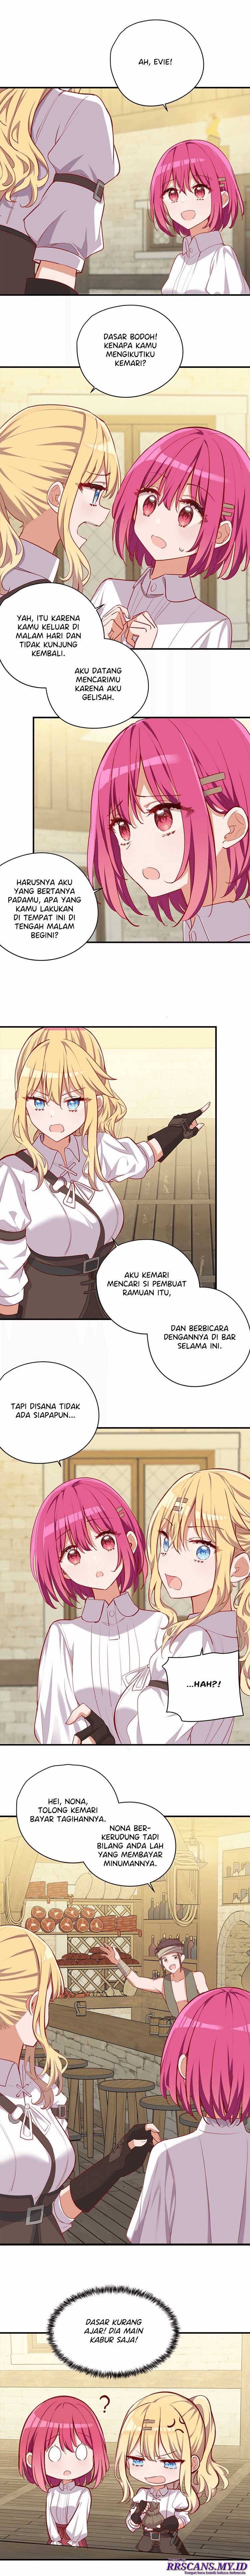 Please Bully Me, Miss Villainess! Chapter 52